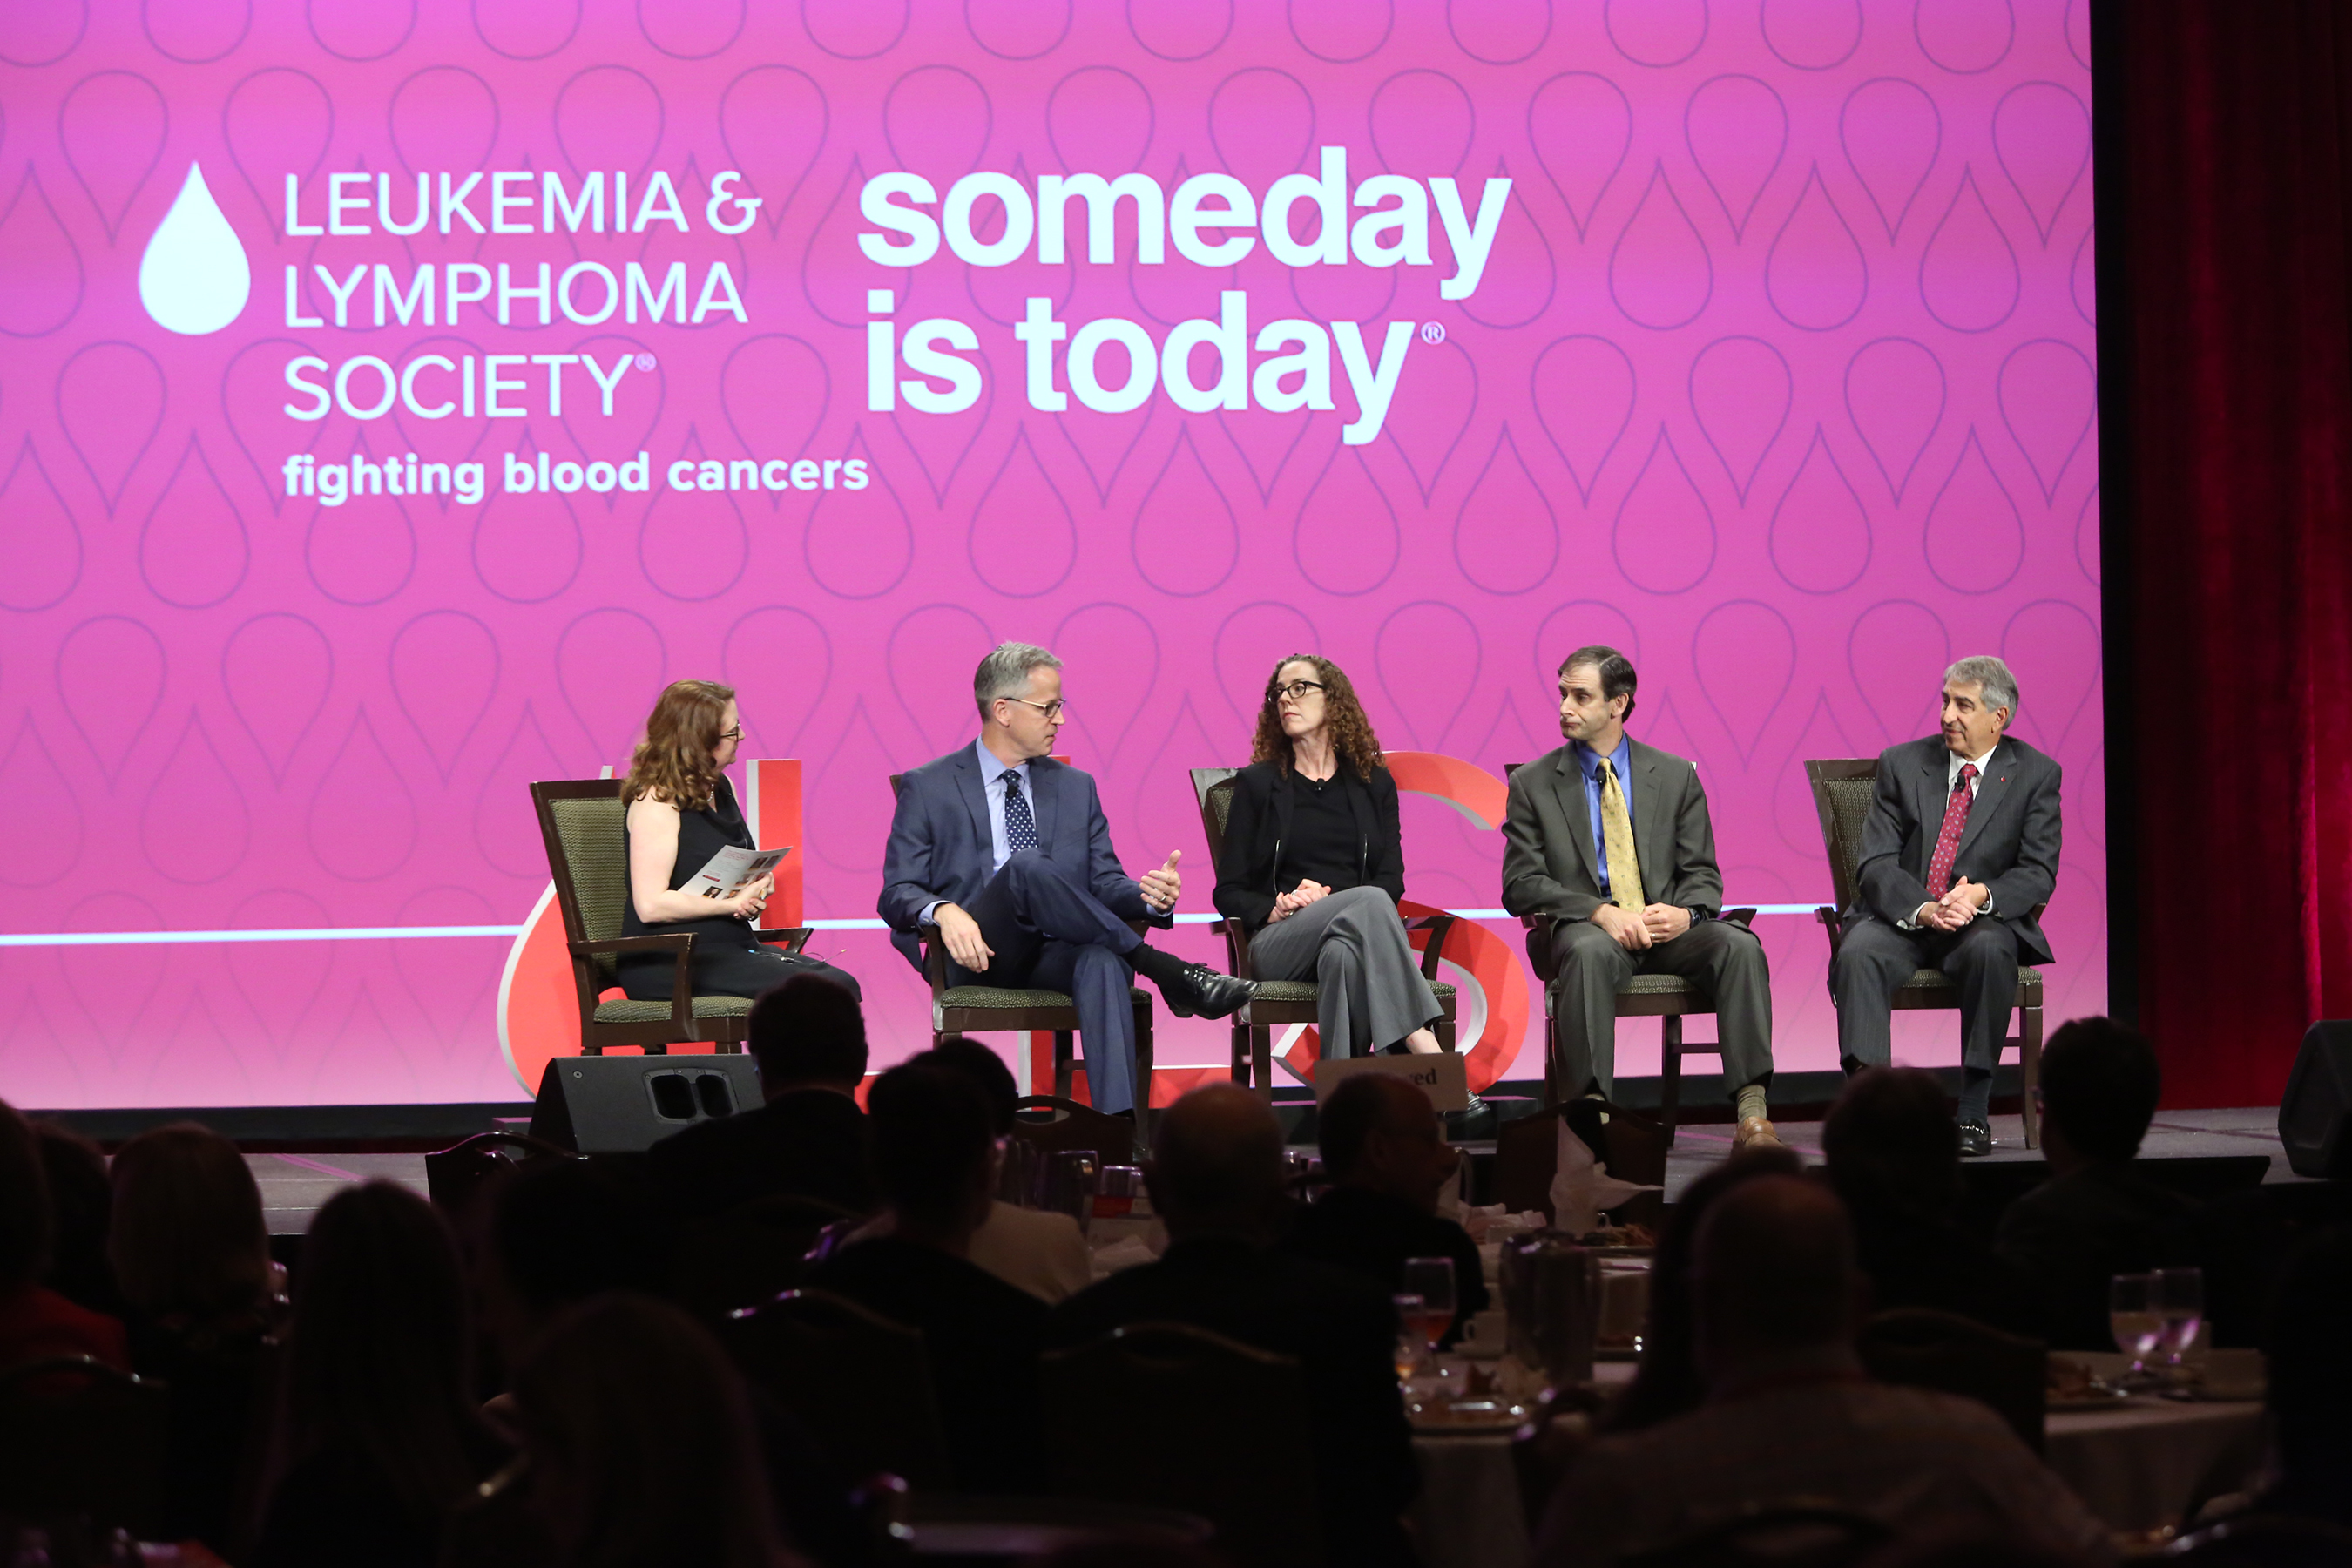 The Leukemia & Lymphoma Society’s “Leading the Way to Cancer Cures” panel on the cost of cancer care. (From left to right: Liz Szabo, Kaiser Health News; Randy Burkholder, PhRMA; Robin Yabroff, Ph.D., MBA, U.S. Department of Health and Human Services; Joshua Seidman, Ph.D., Avalere; Louis DeGennaro, Ph.D., LLS.)